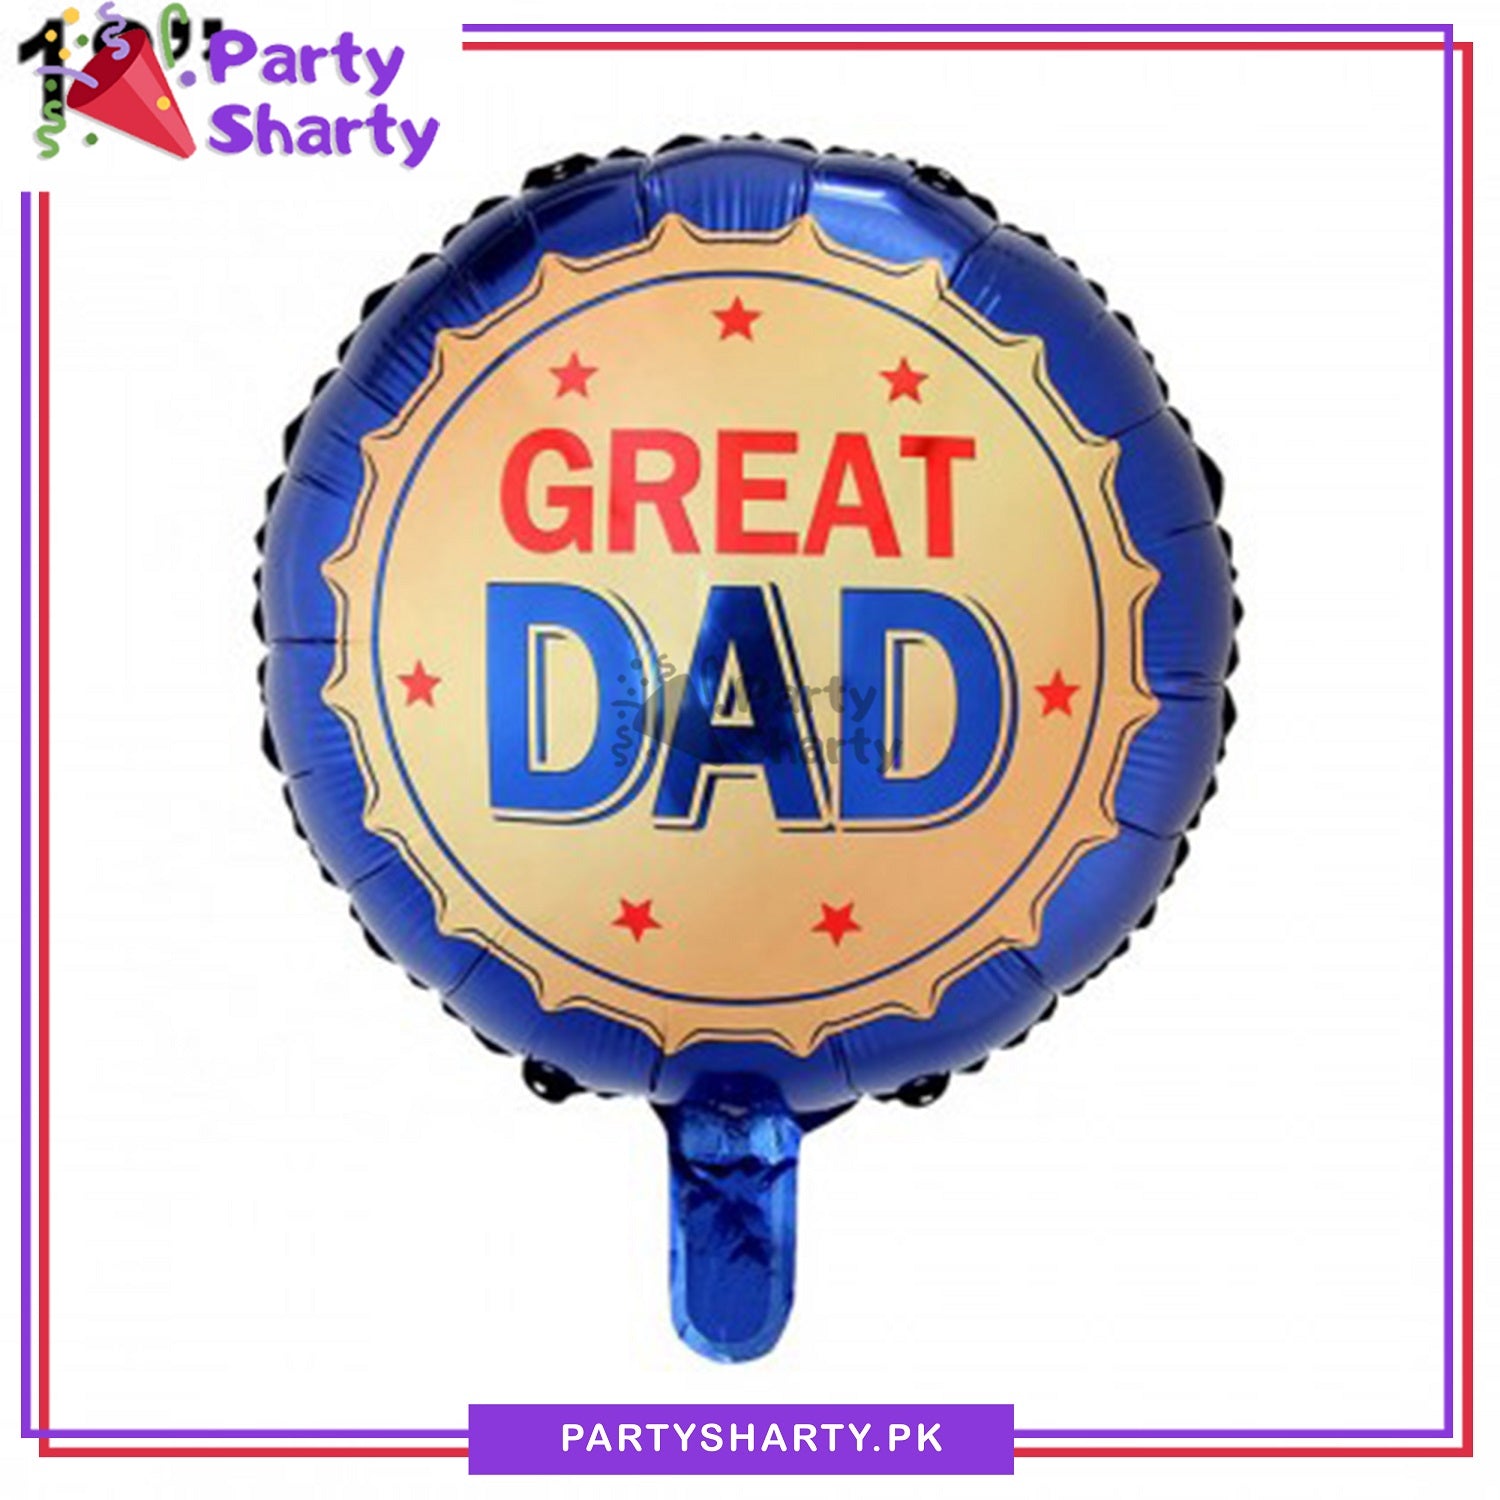 Great Dad Round Shaped Foil Balloon For Father's Day Celebration